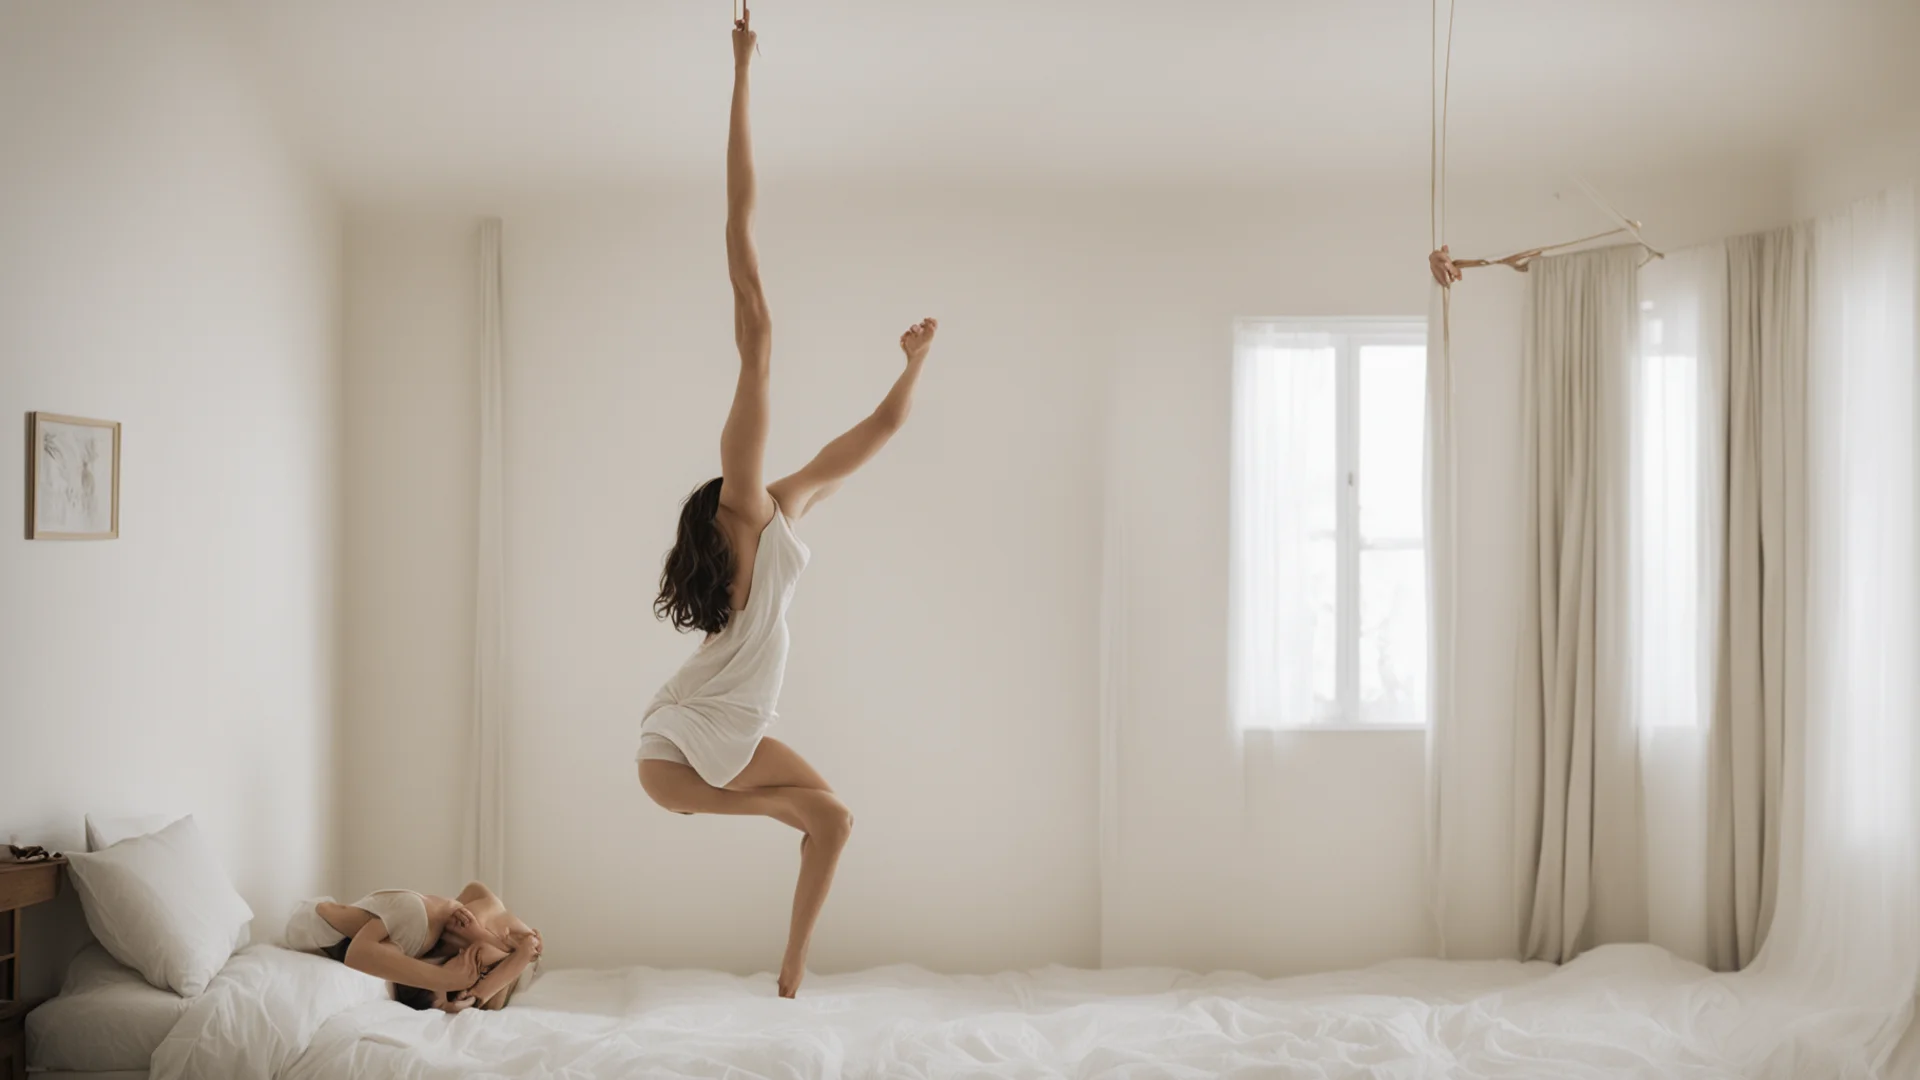 a woman hanging herself in a bedroom amazing awesome portrait 2 wide